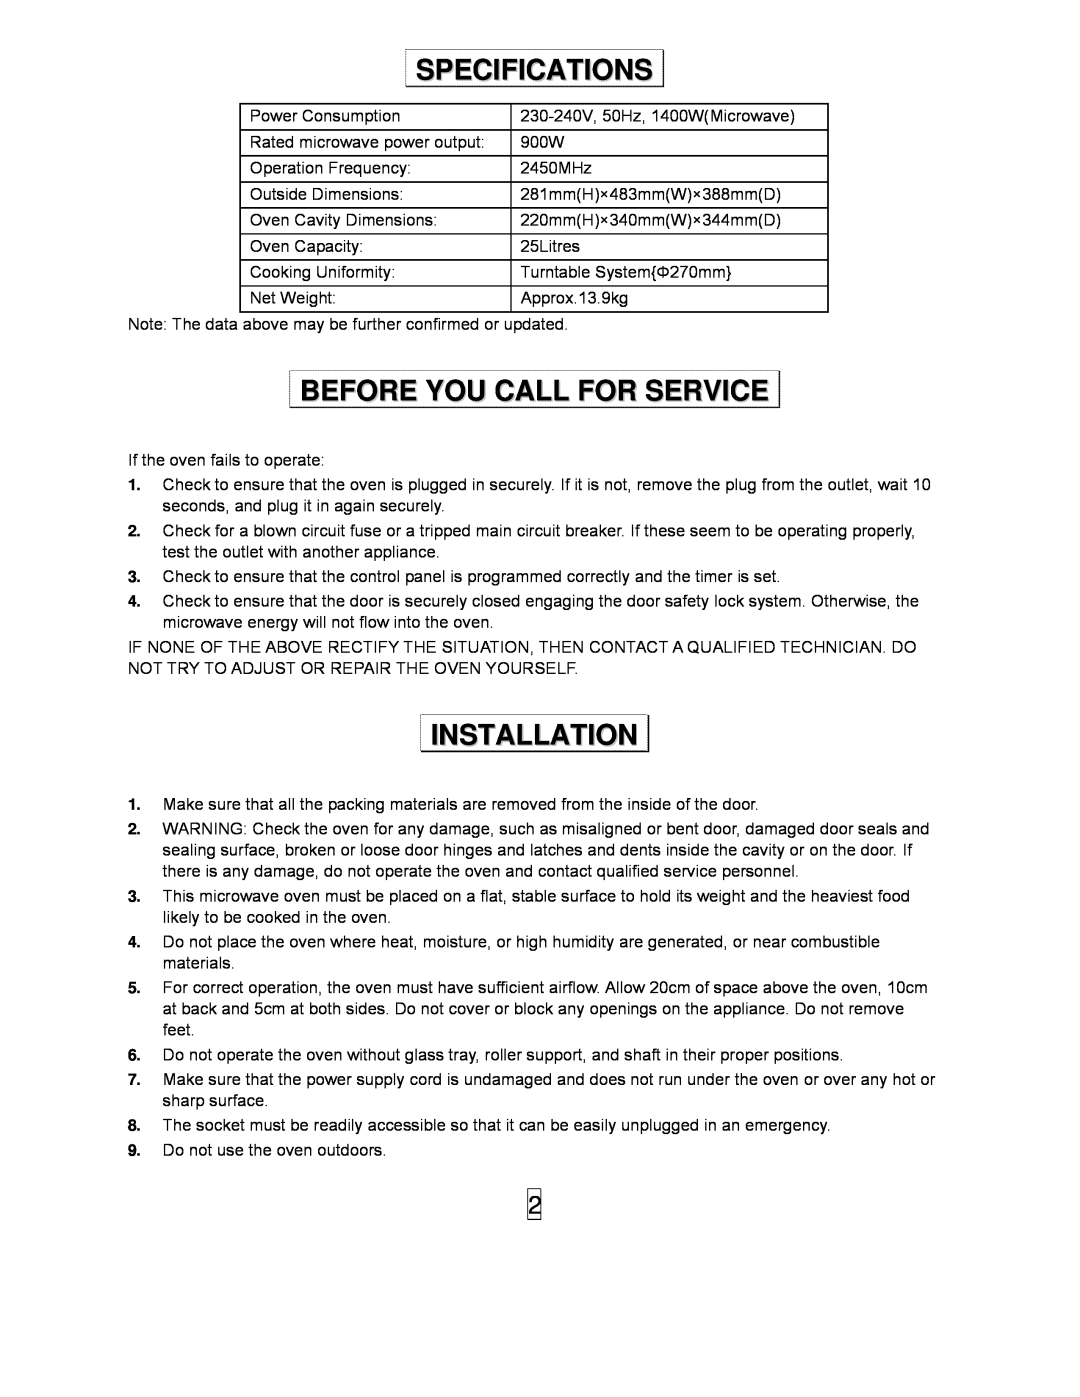 Sanyo EM-S5597B instruction manual Specifications, Before You Call For Service, Installation 